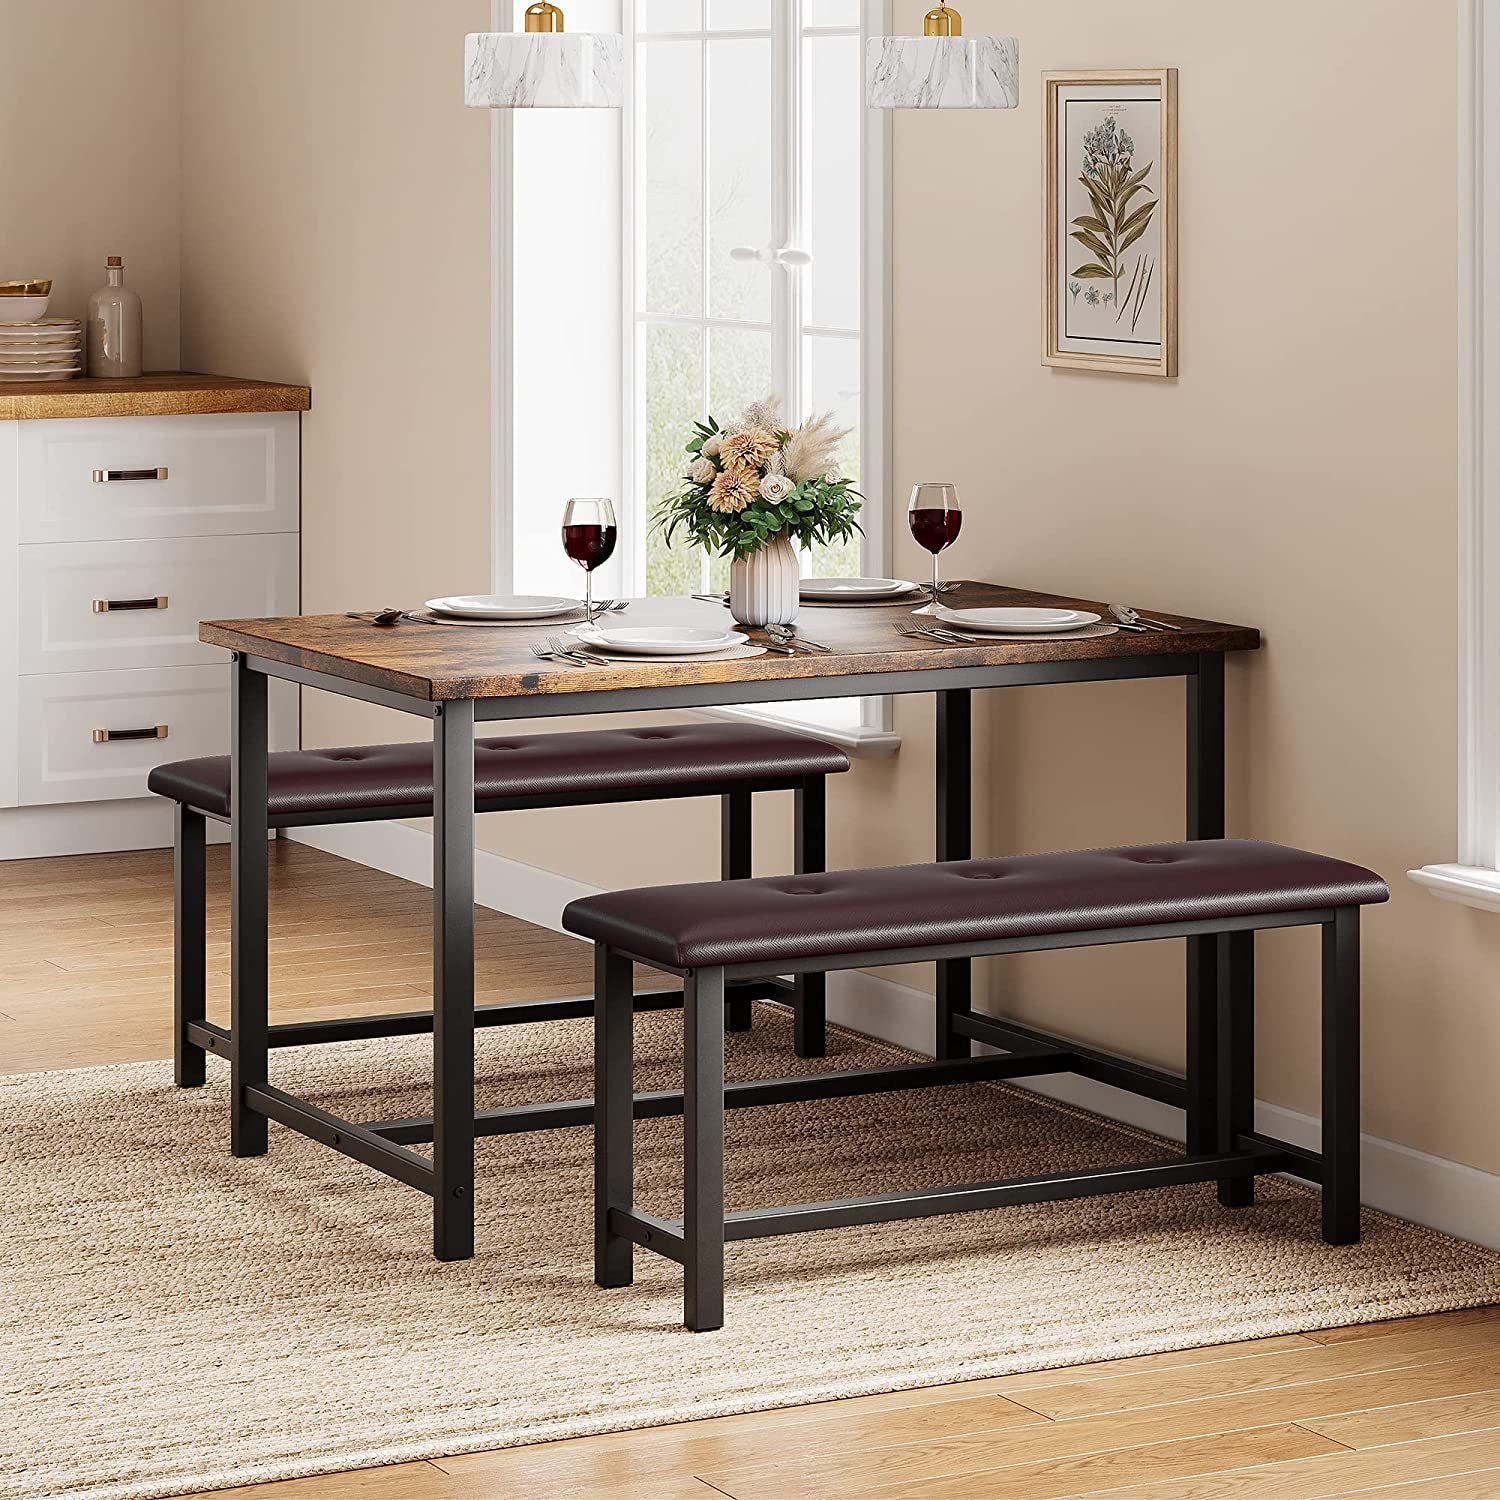 Dining Table Set for 4, Kitchen Table Set for 4 with Upholstered Benches, Rectangular Dining Room Table Set for Small Space, Apartment, Studio, Rustic Brown